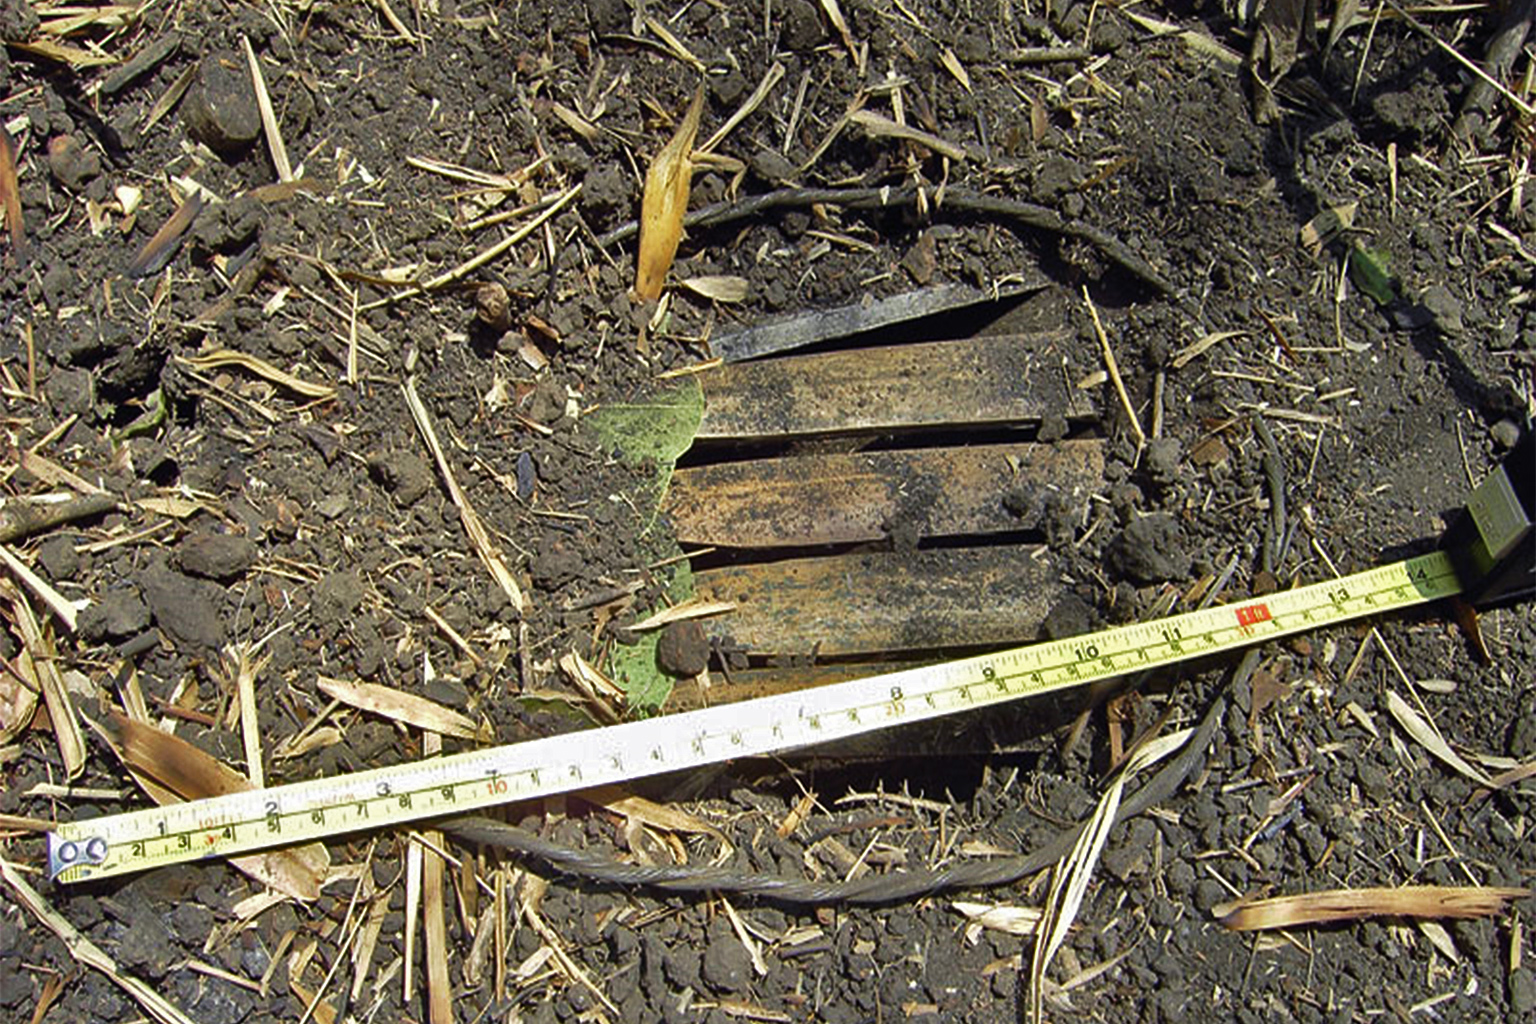 A foot snare set by hunters in Srepok Wildlife Sanctuary, eastern Cambodia.